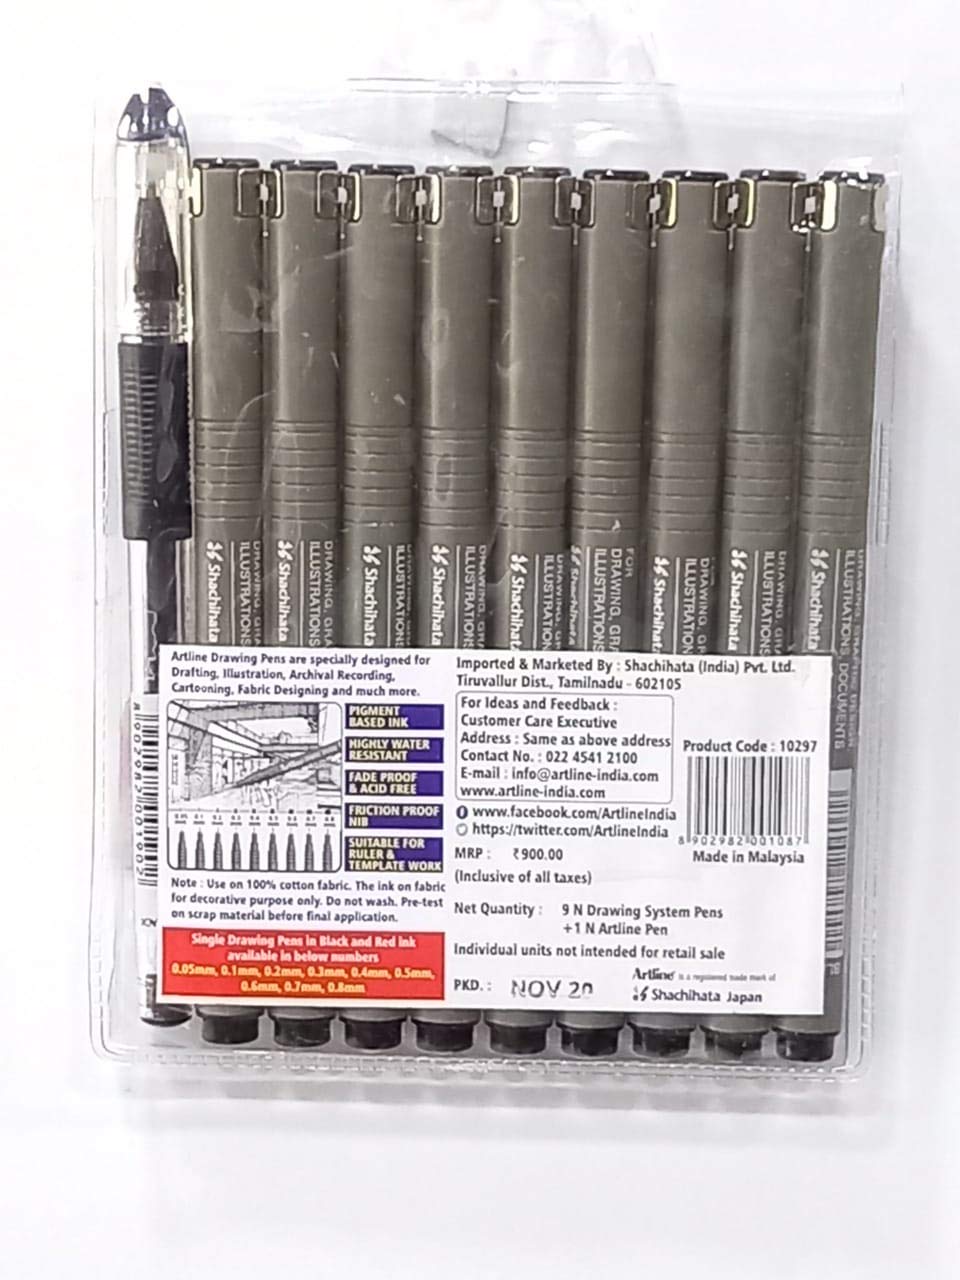 Rotring Tikky Graphic Pigment Liner 0.1mm, 0.2mm, 0.3mm, 0.5mm, 0.8mm Pens  - Starbox